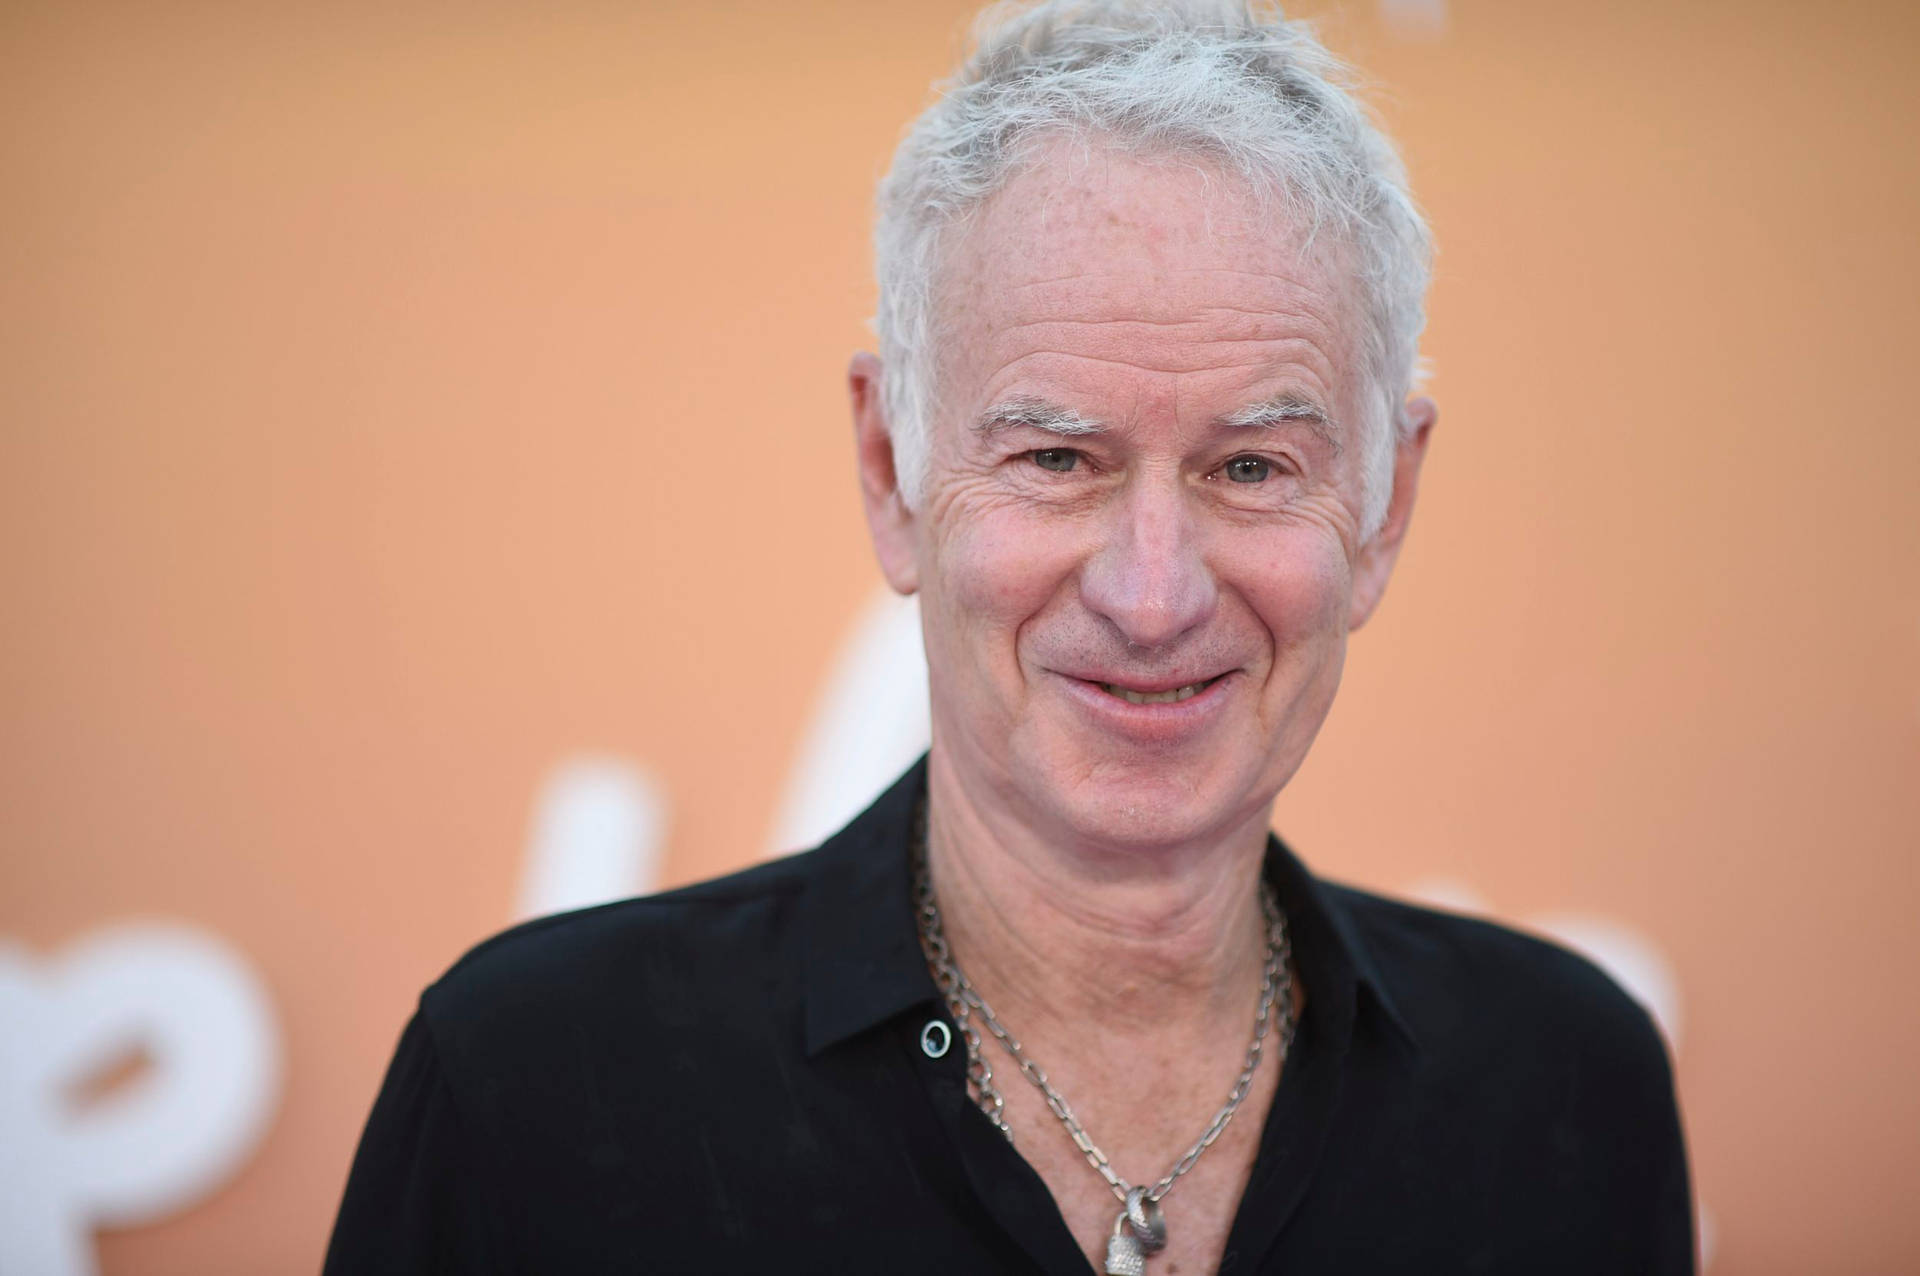 Johnmcenroe Ler. (assuming This Is A Statement That Could Be Used As A Description For A Computer Or Mobile Wallpaper Featuring An Image Of John Mcenroe Smiling.) Wallpaper